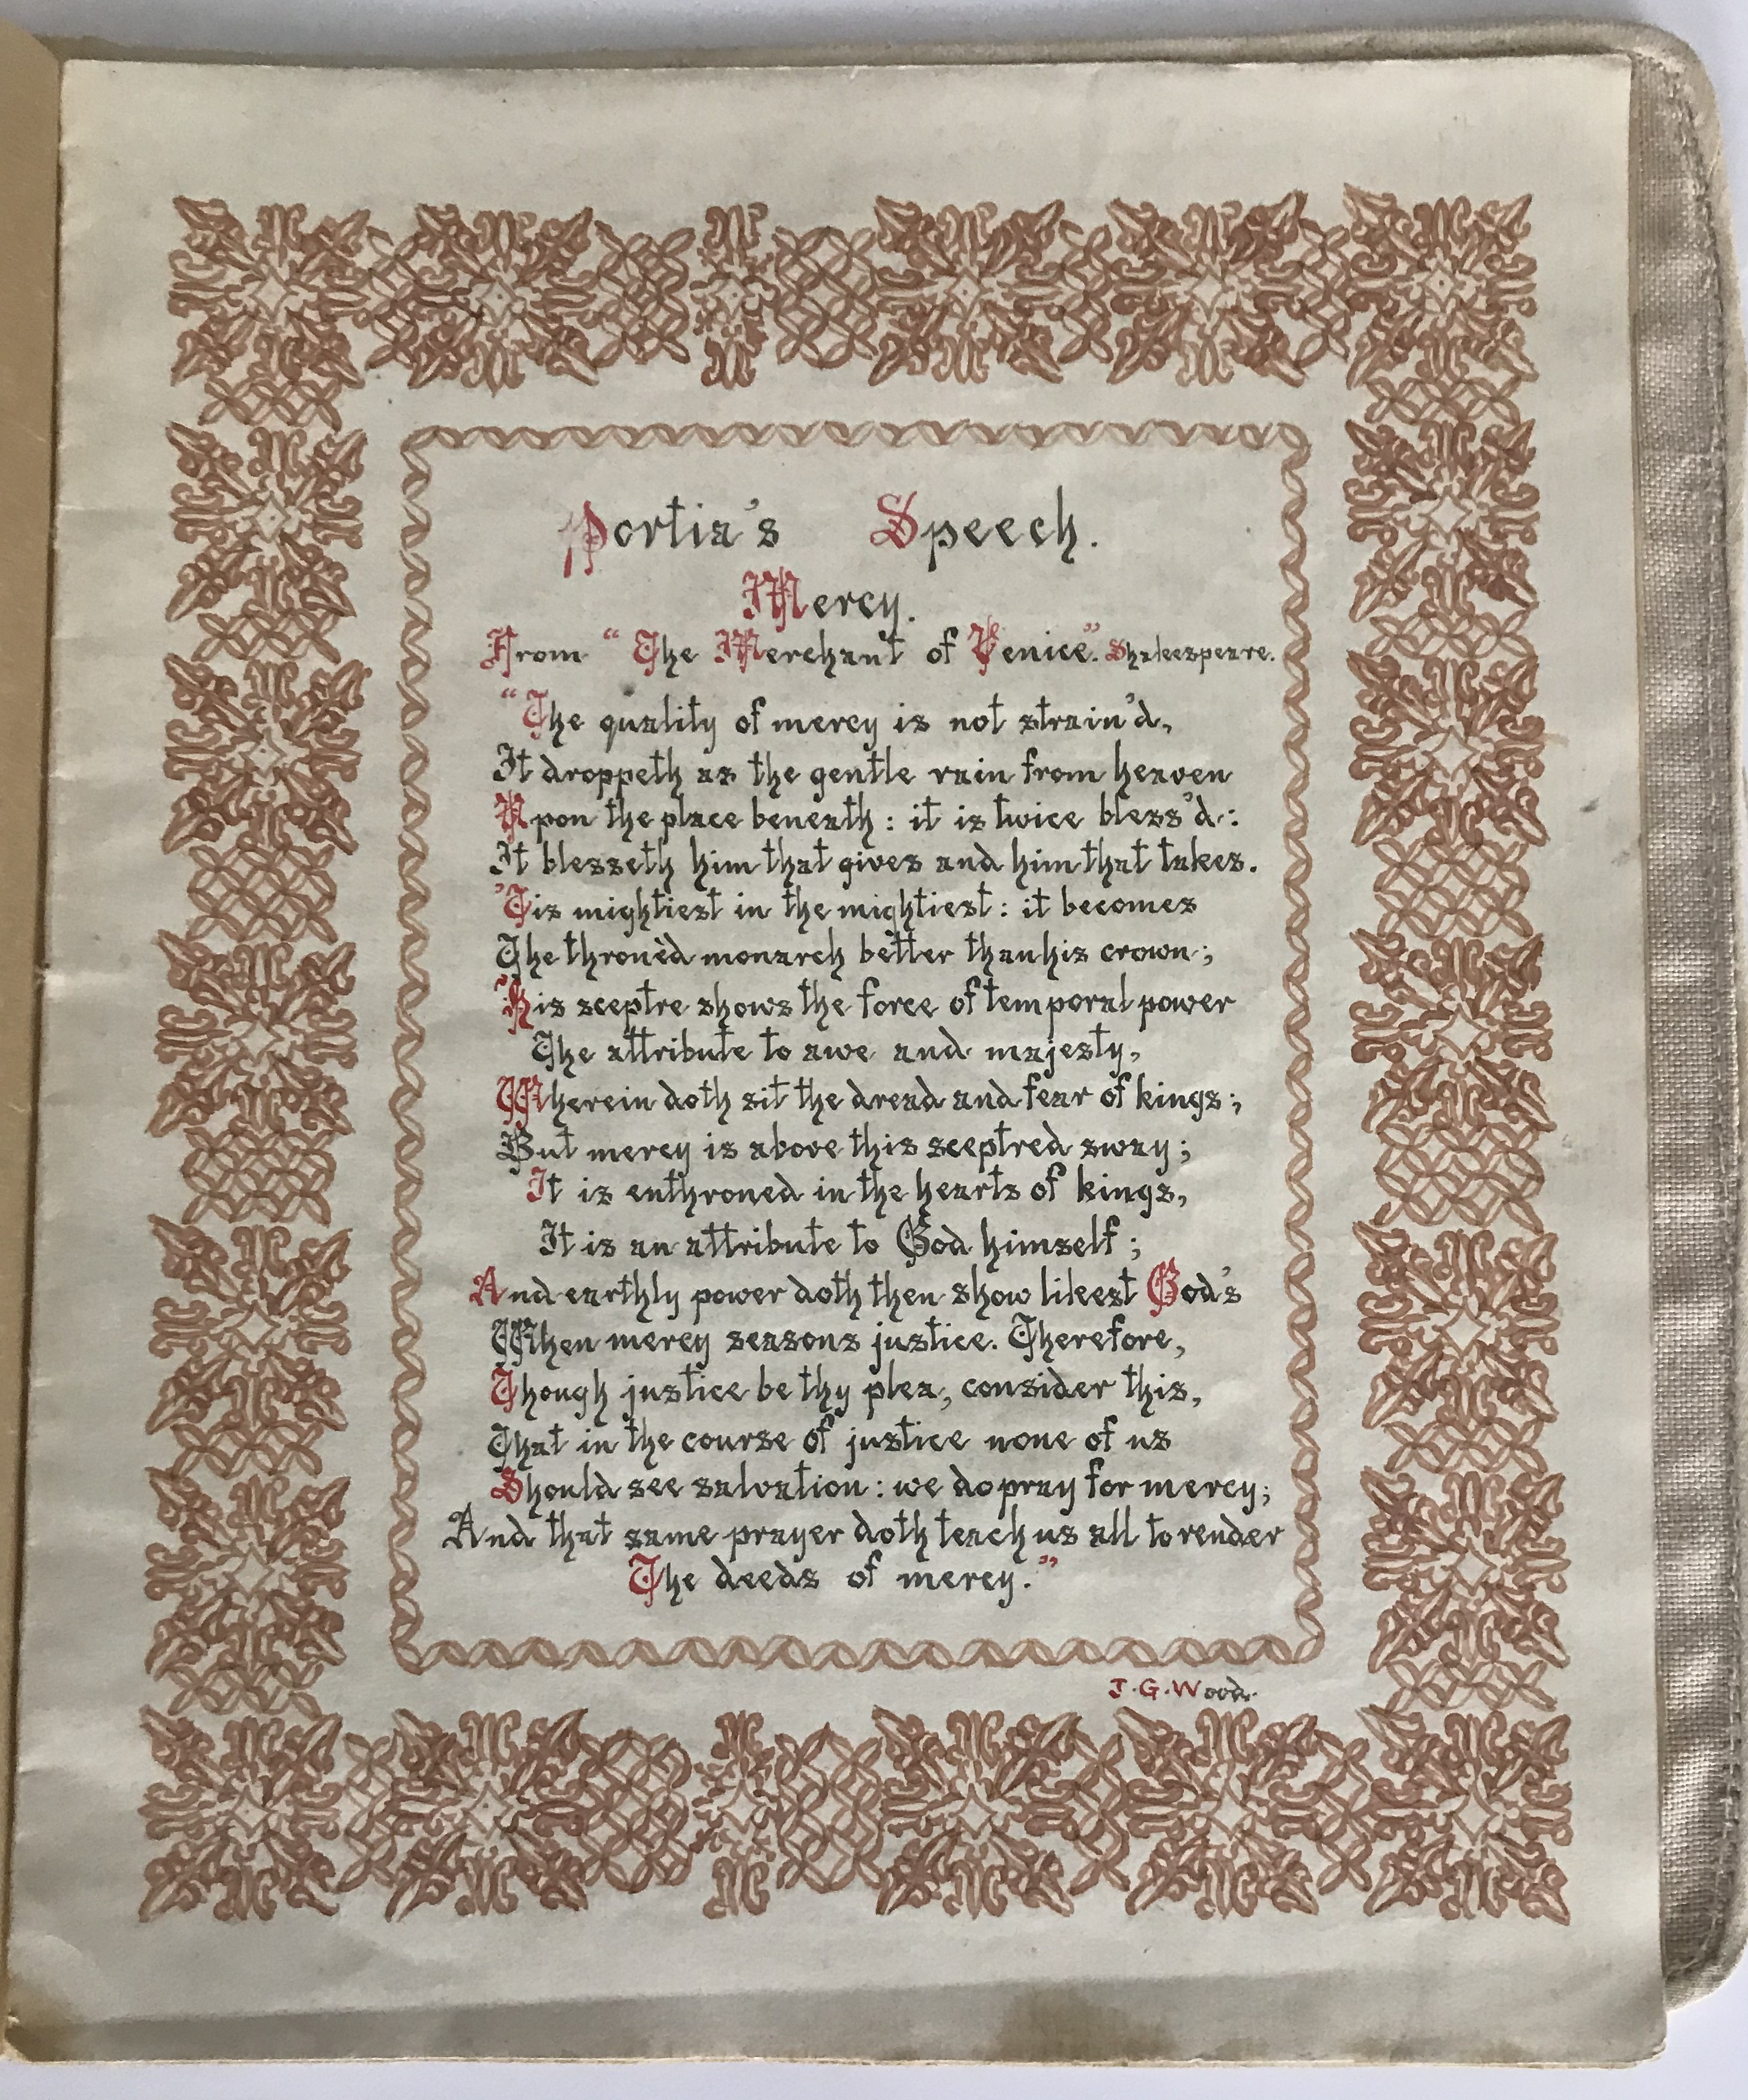 UNUSUAL HANDWRITTEN PORTIR’S SPEECH WITH CLOTH COVERS BY J.G. WOOD